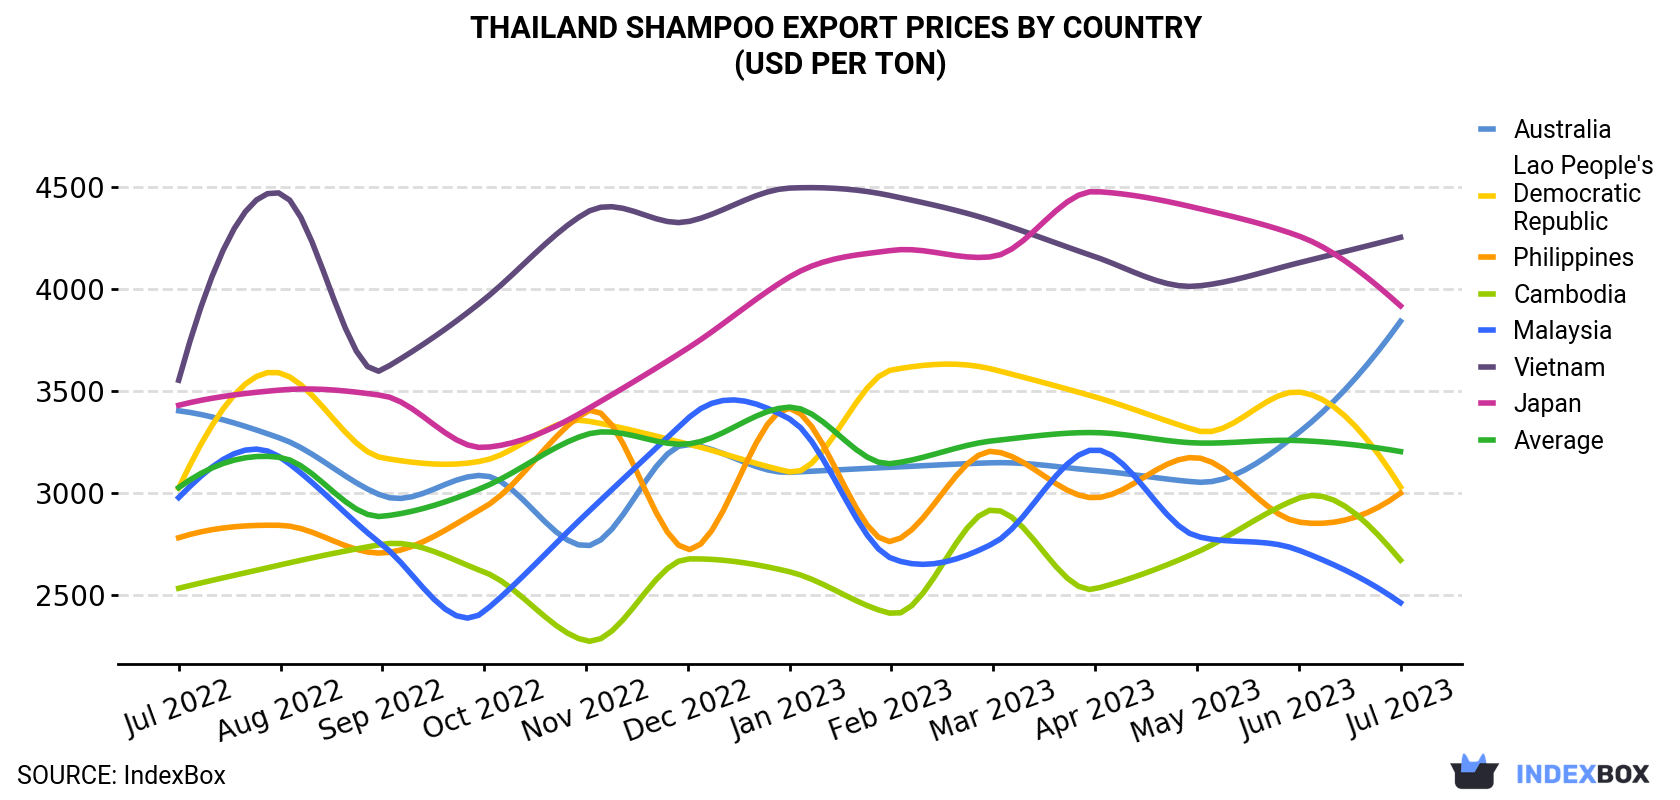 Thailand Shampoo Export Prices By Country (USD Per Ton)